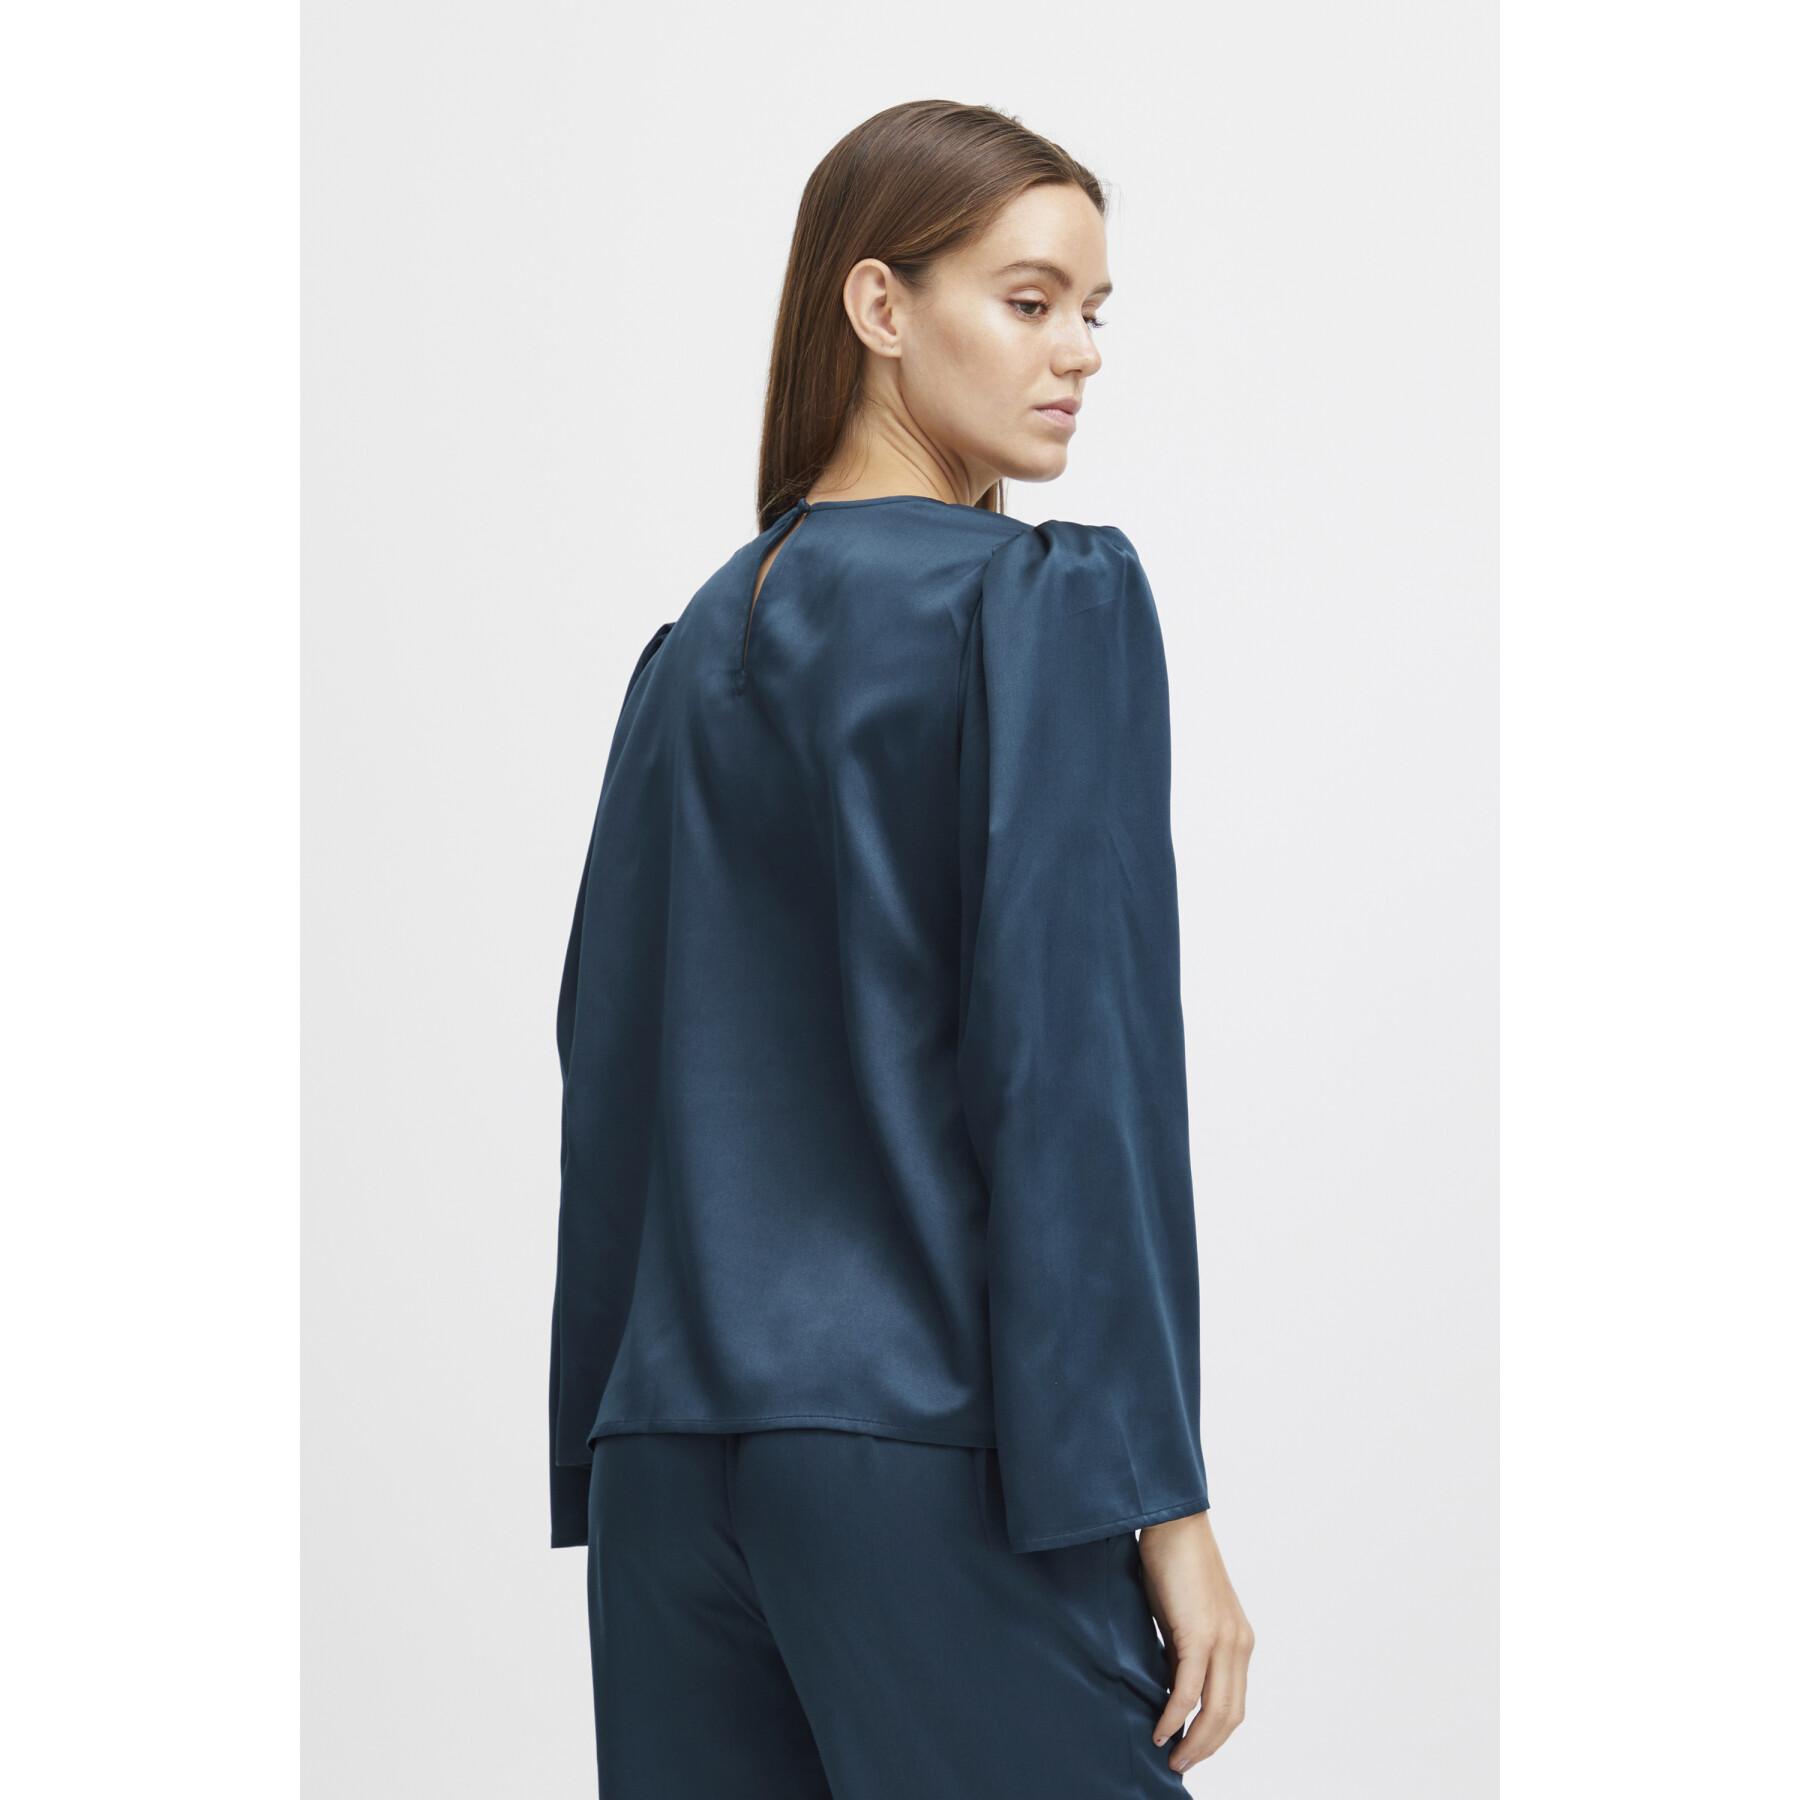 Women's blouse b.young Ypine